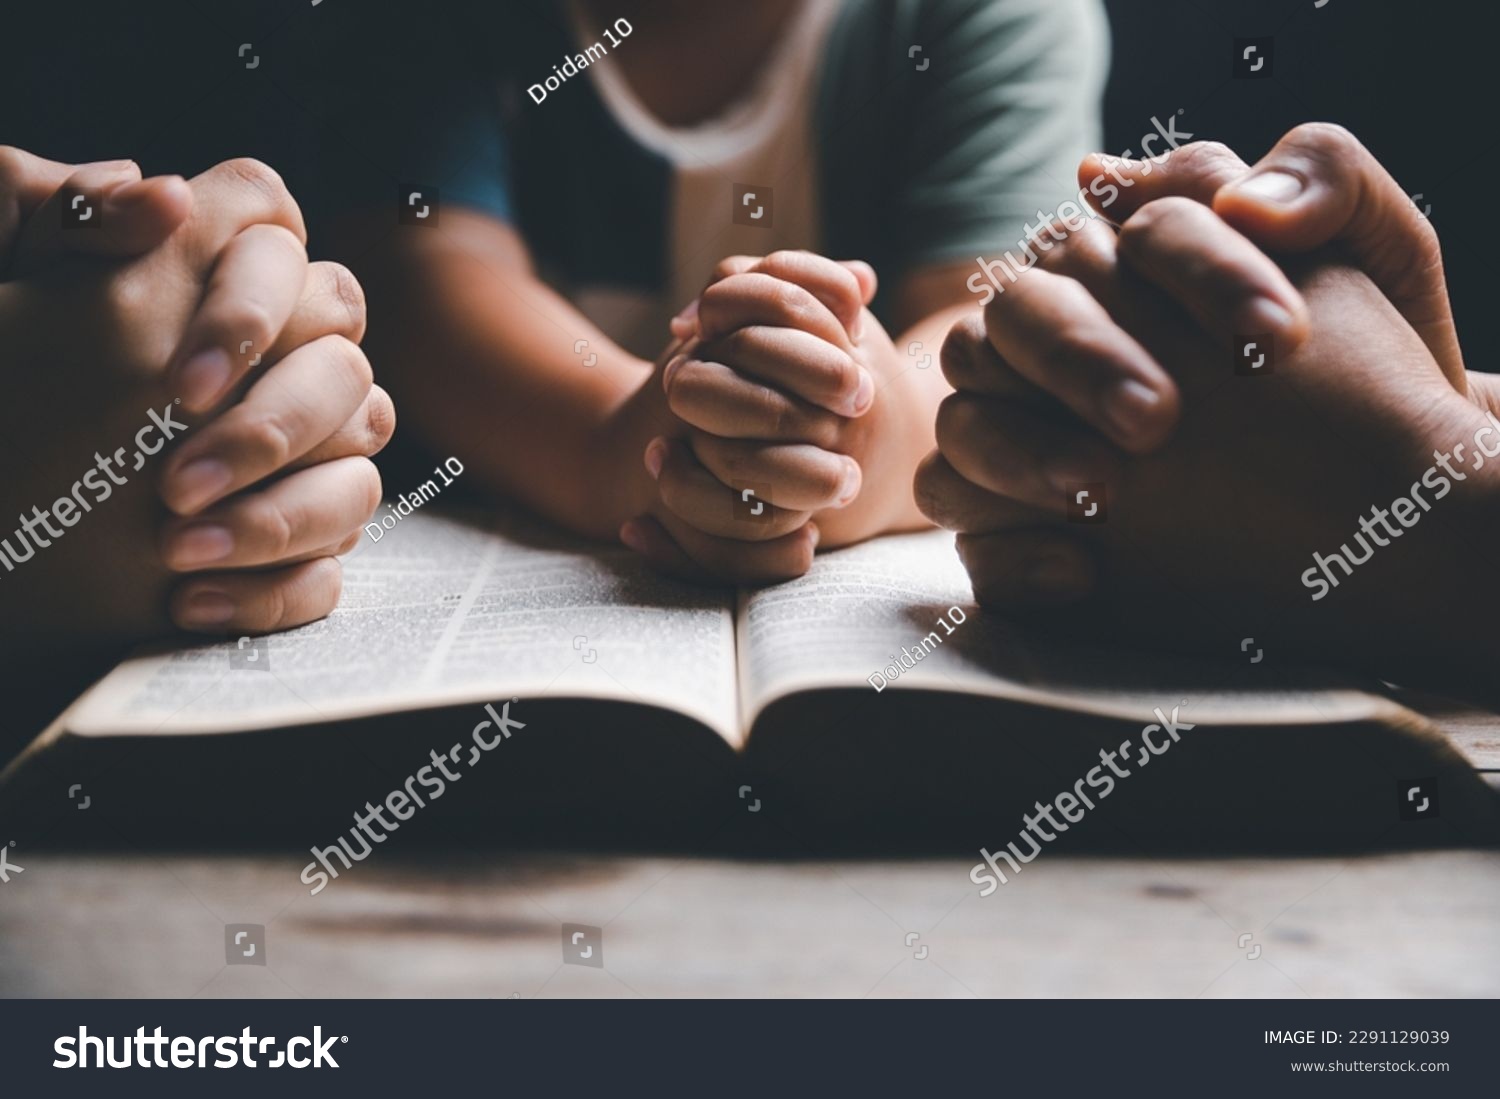 Christian family praying together concept. Child and mother worship God in home. Woman and boy hands praying to god with the bible begging for forgiveness and believe in goodness. #2291129039